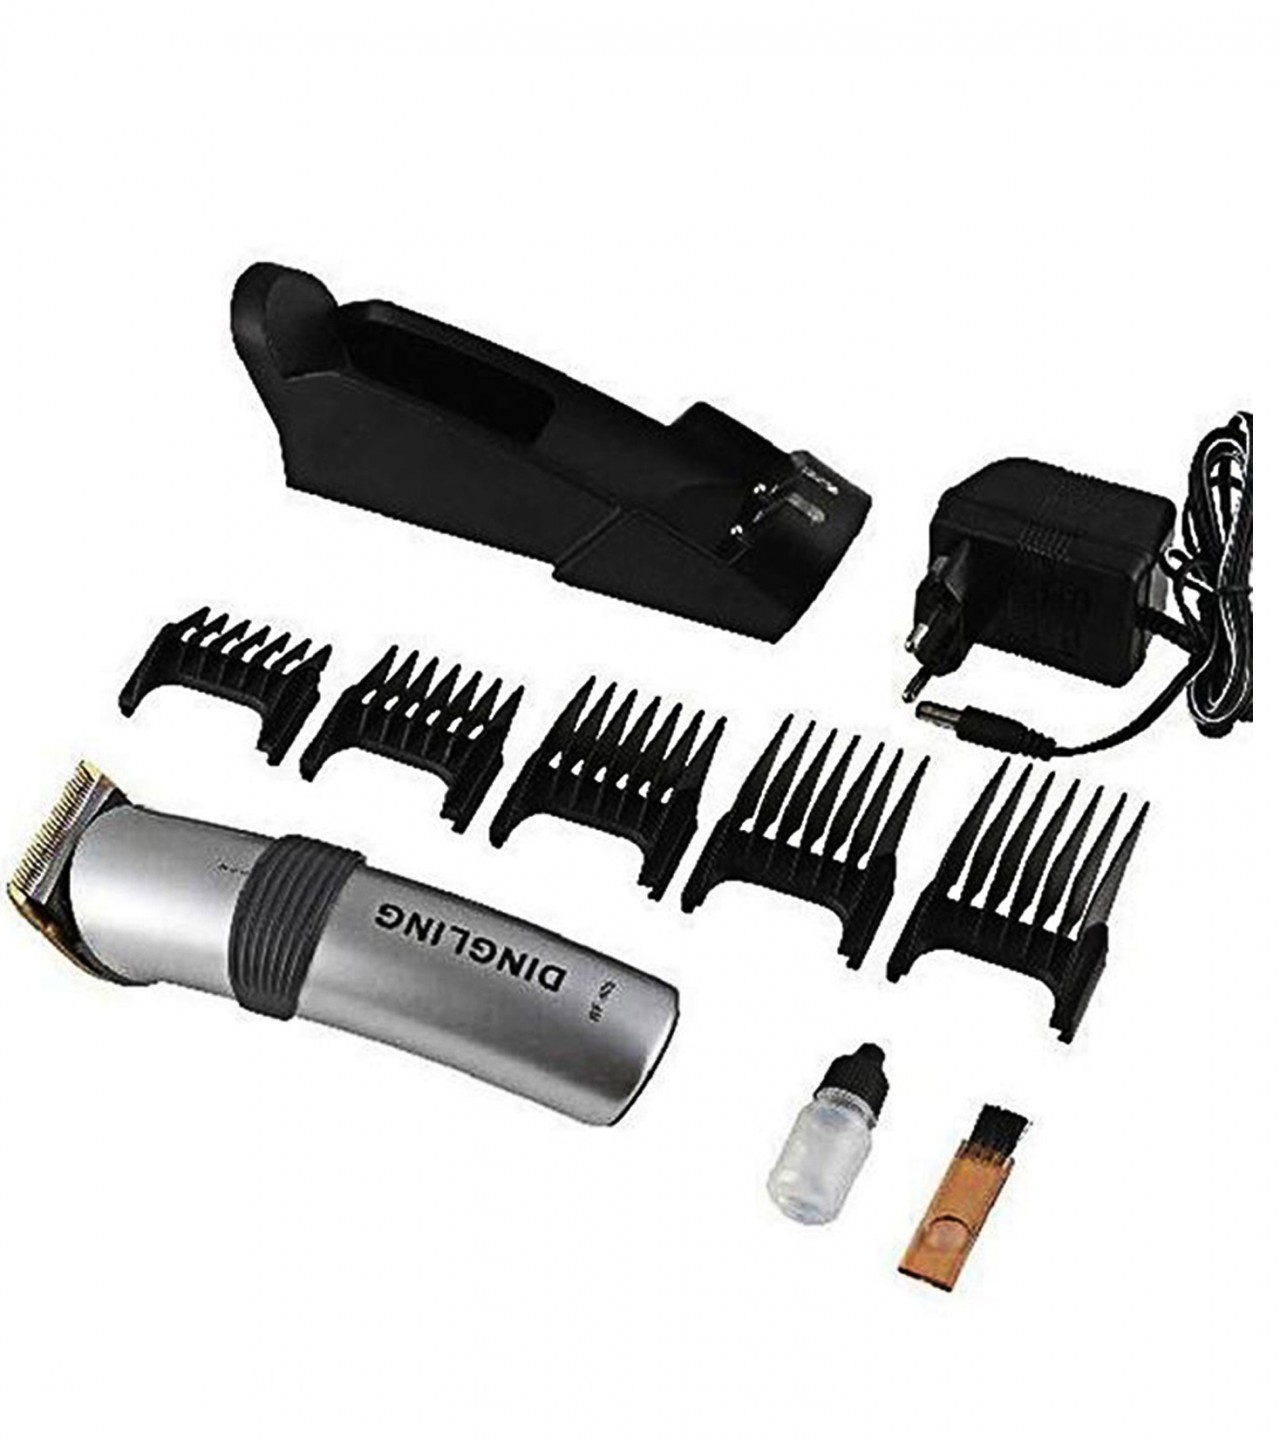 Dingling RF-699 Hair Trimmer And Shaver For Men - Silver